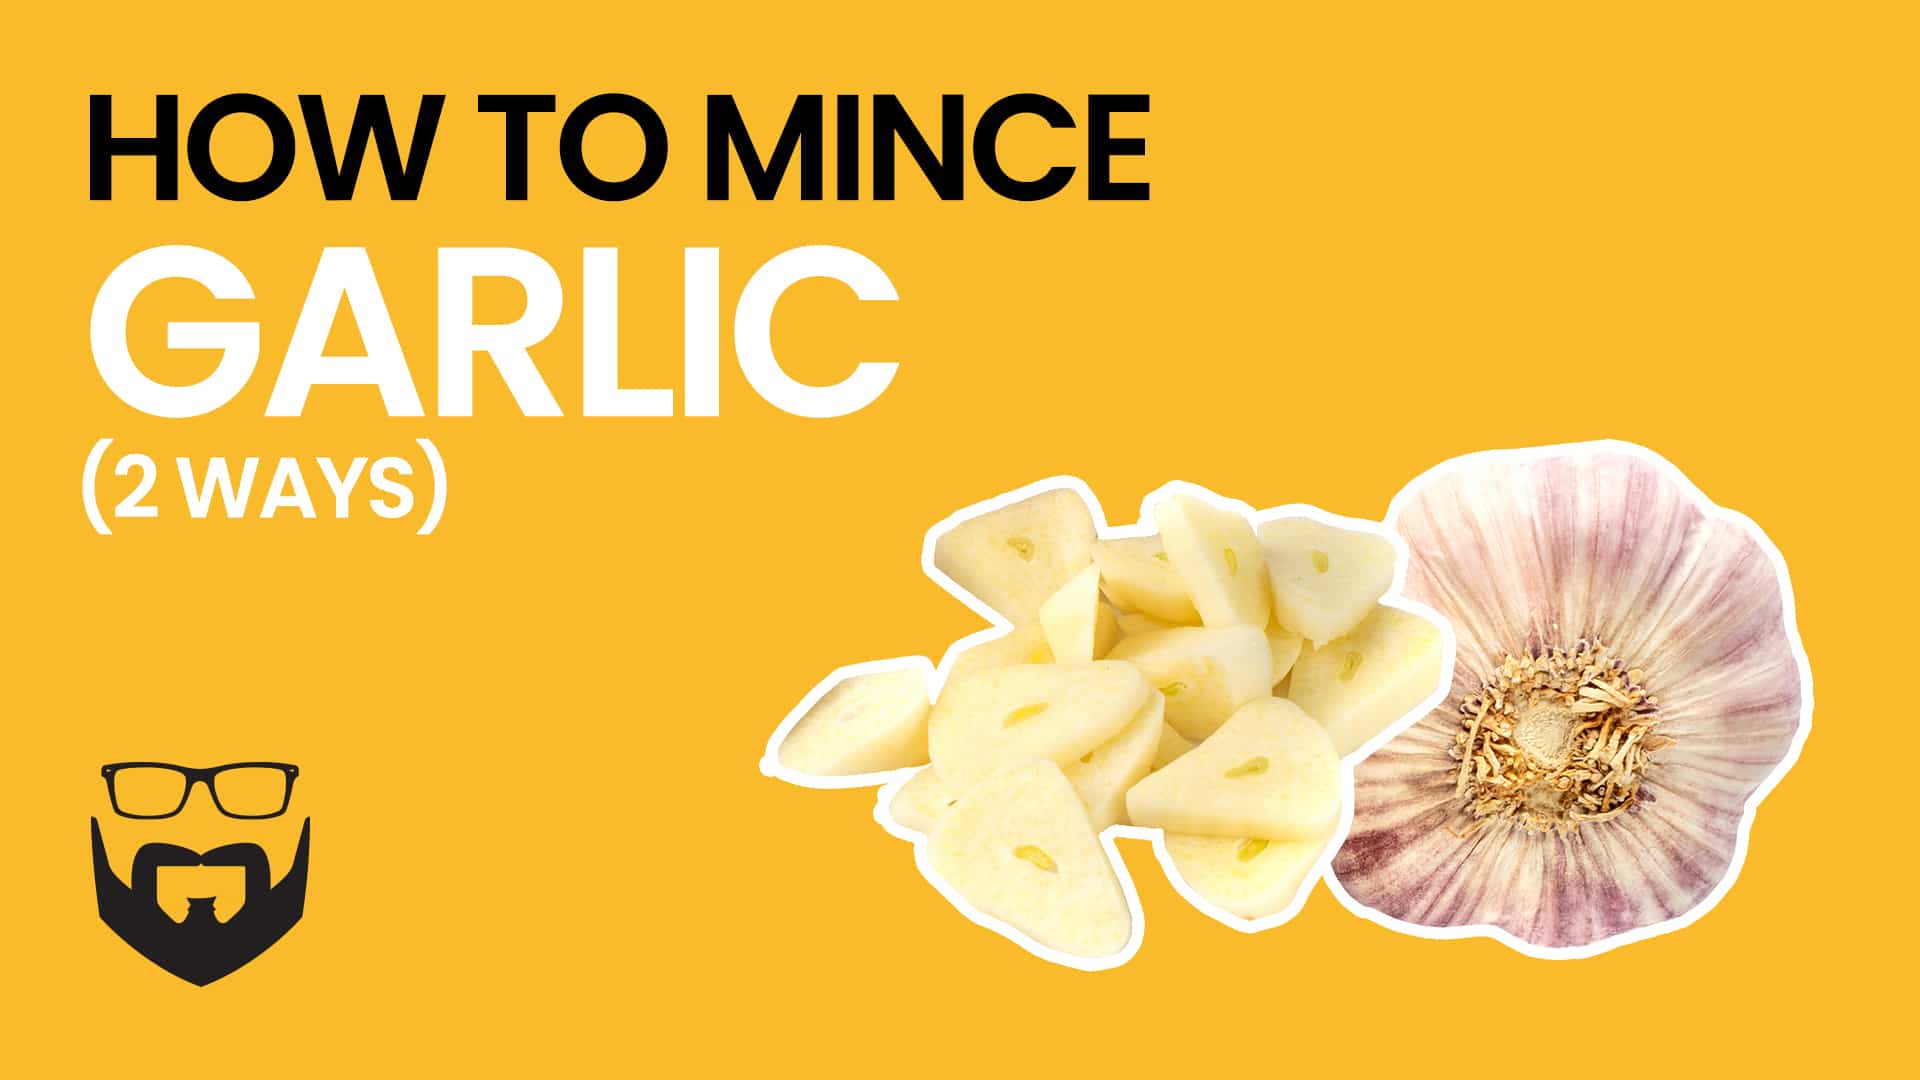 How to Mince Garlic Video - Yellow